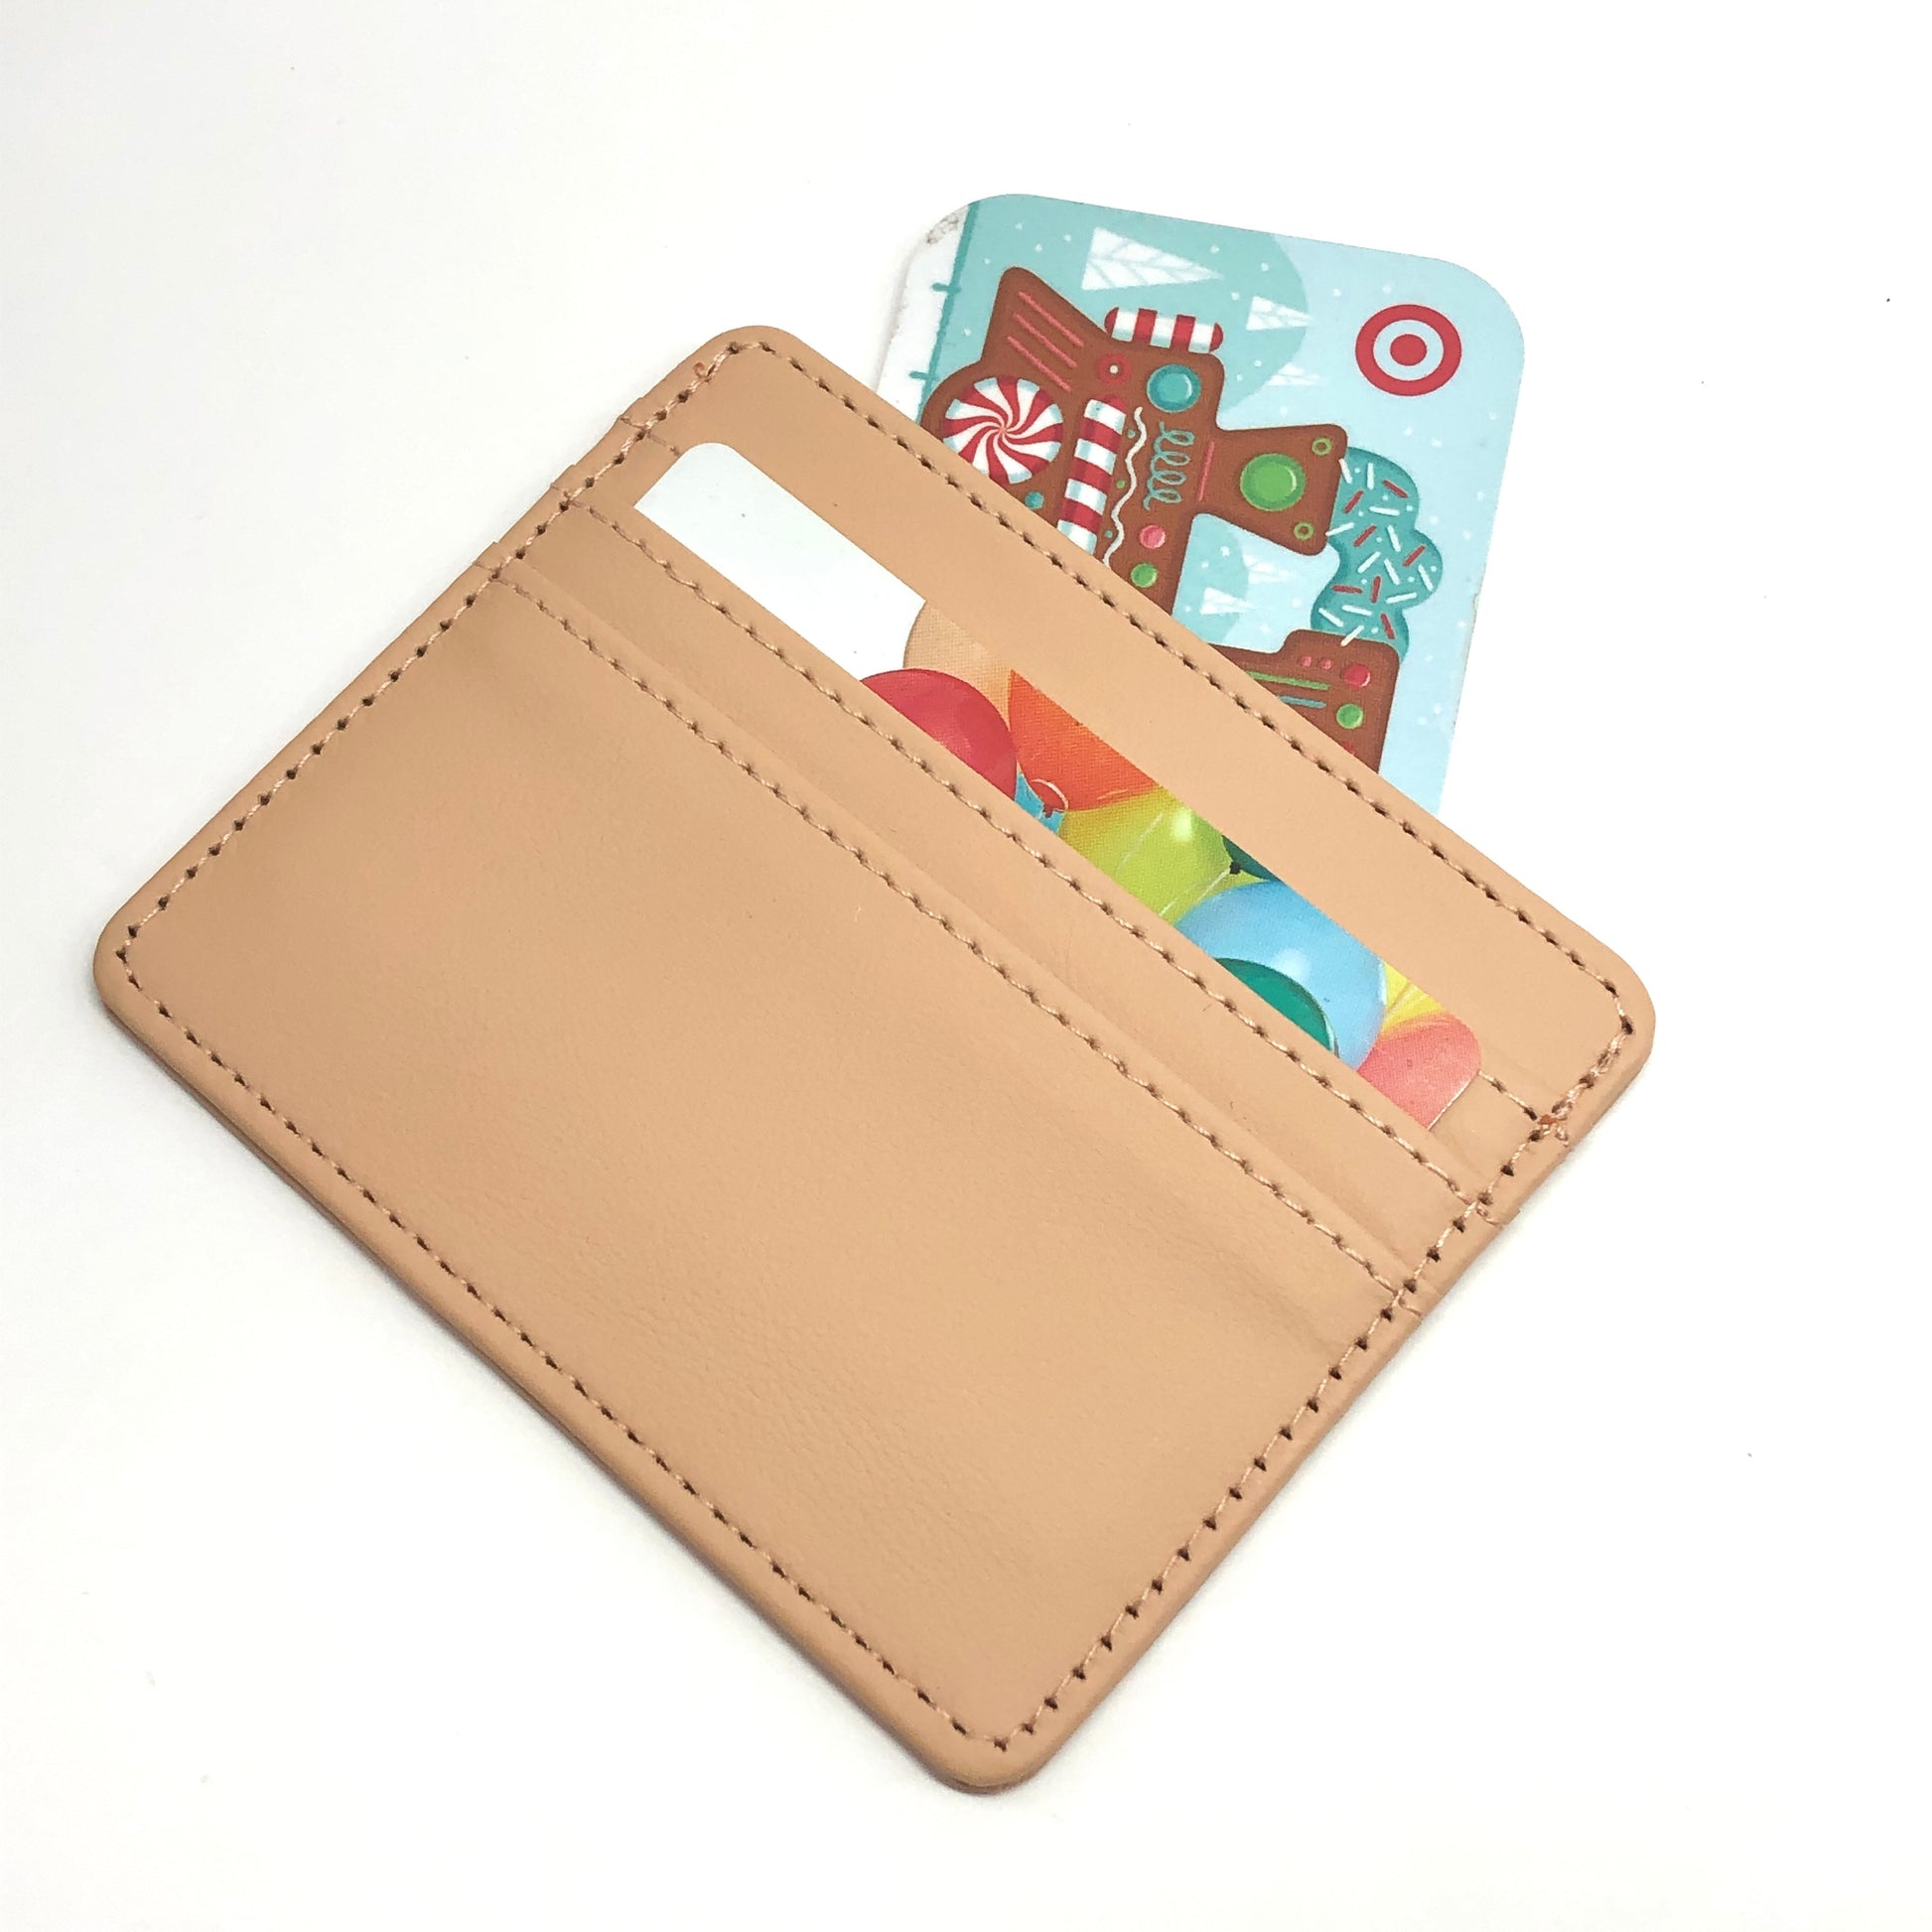 Slim Wallet, Small Camel Tan 4in Faux Leather Thin Wallet / Credit Card Holder - Blingschlingers